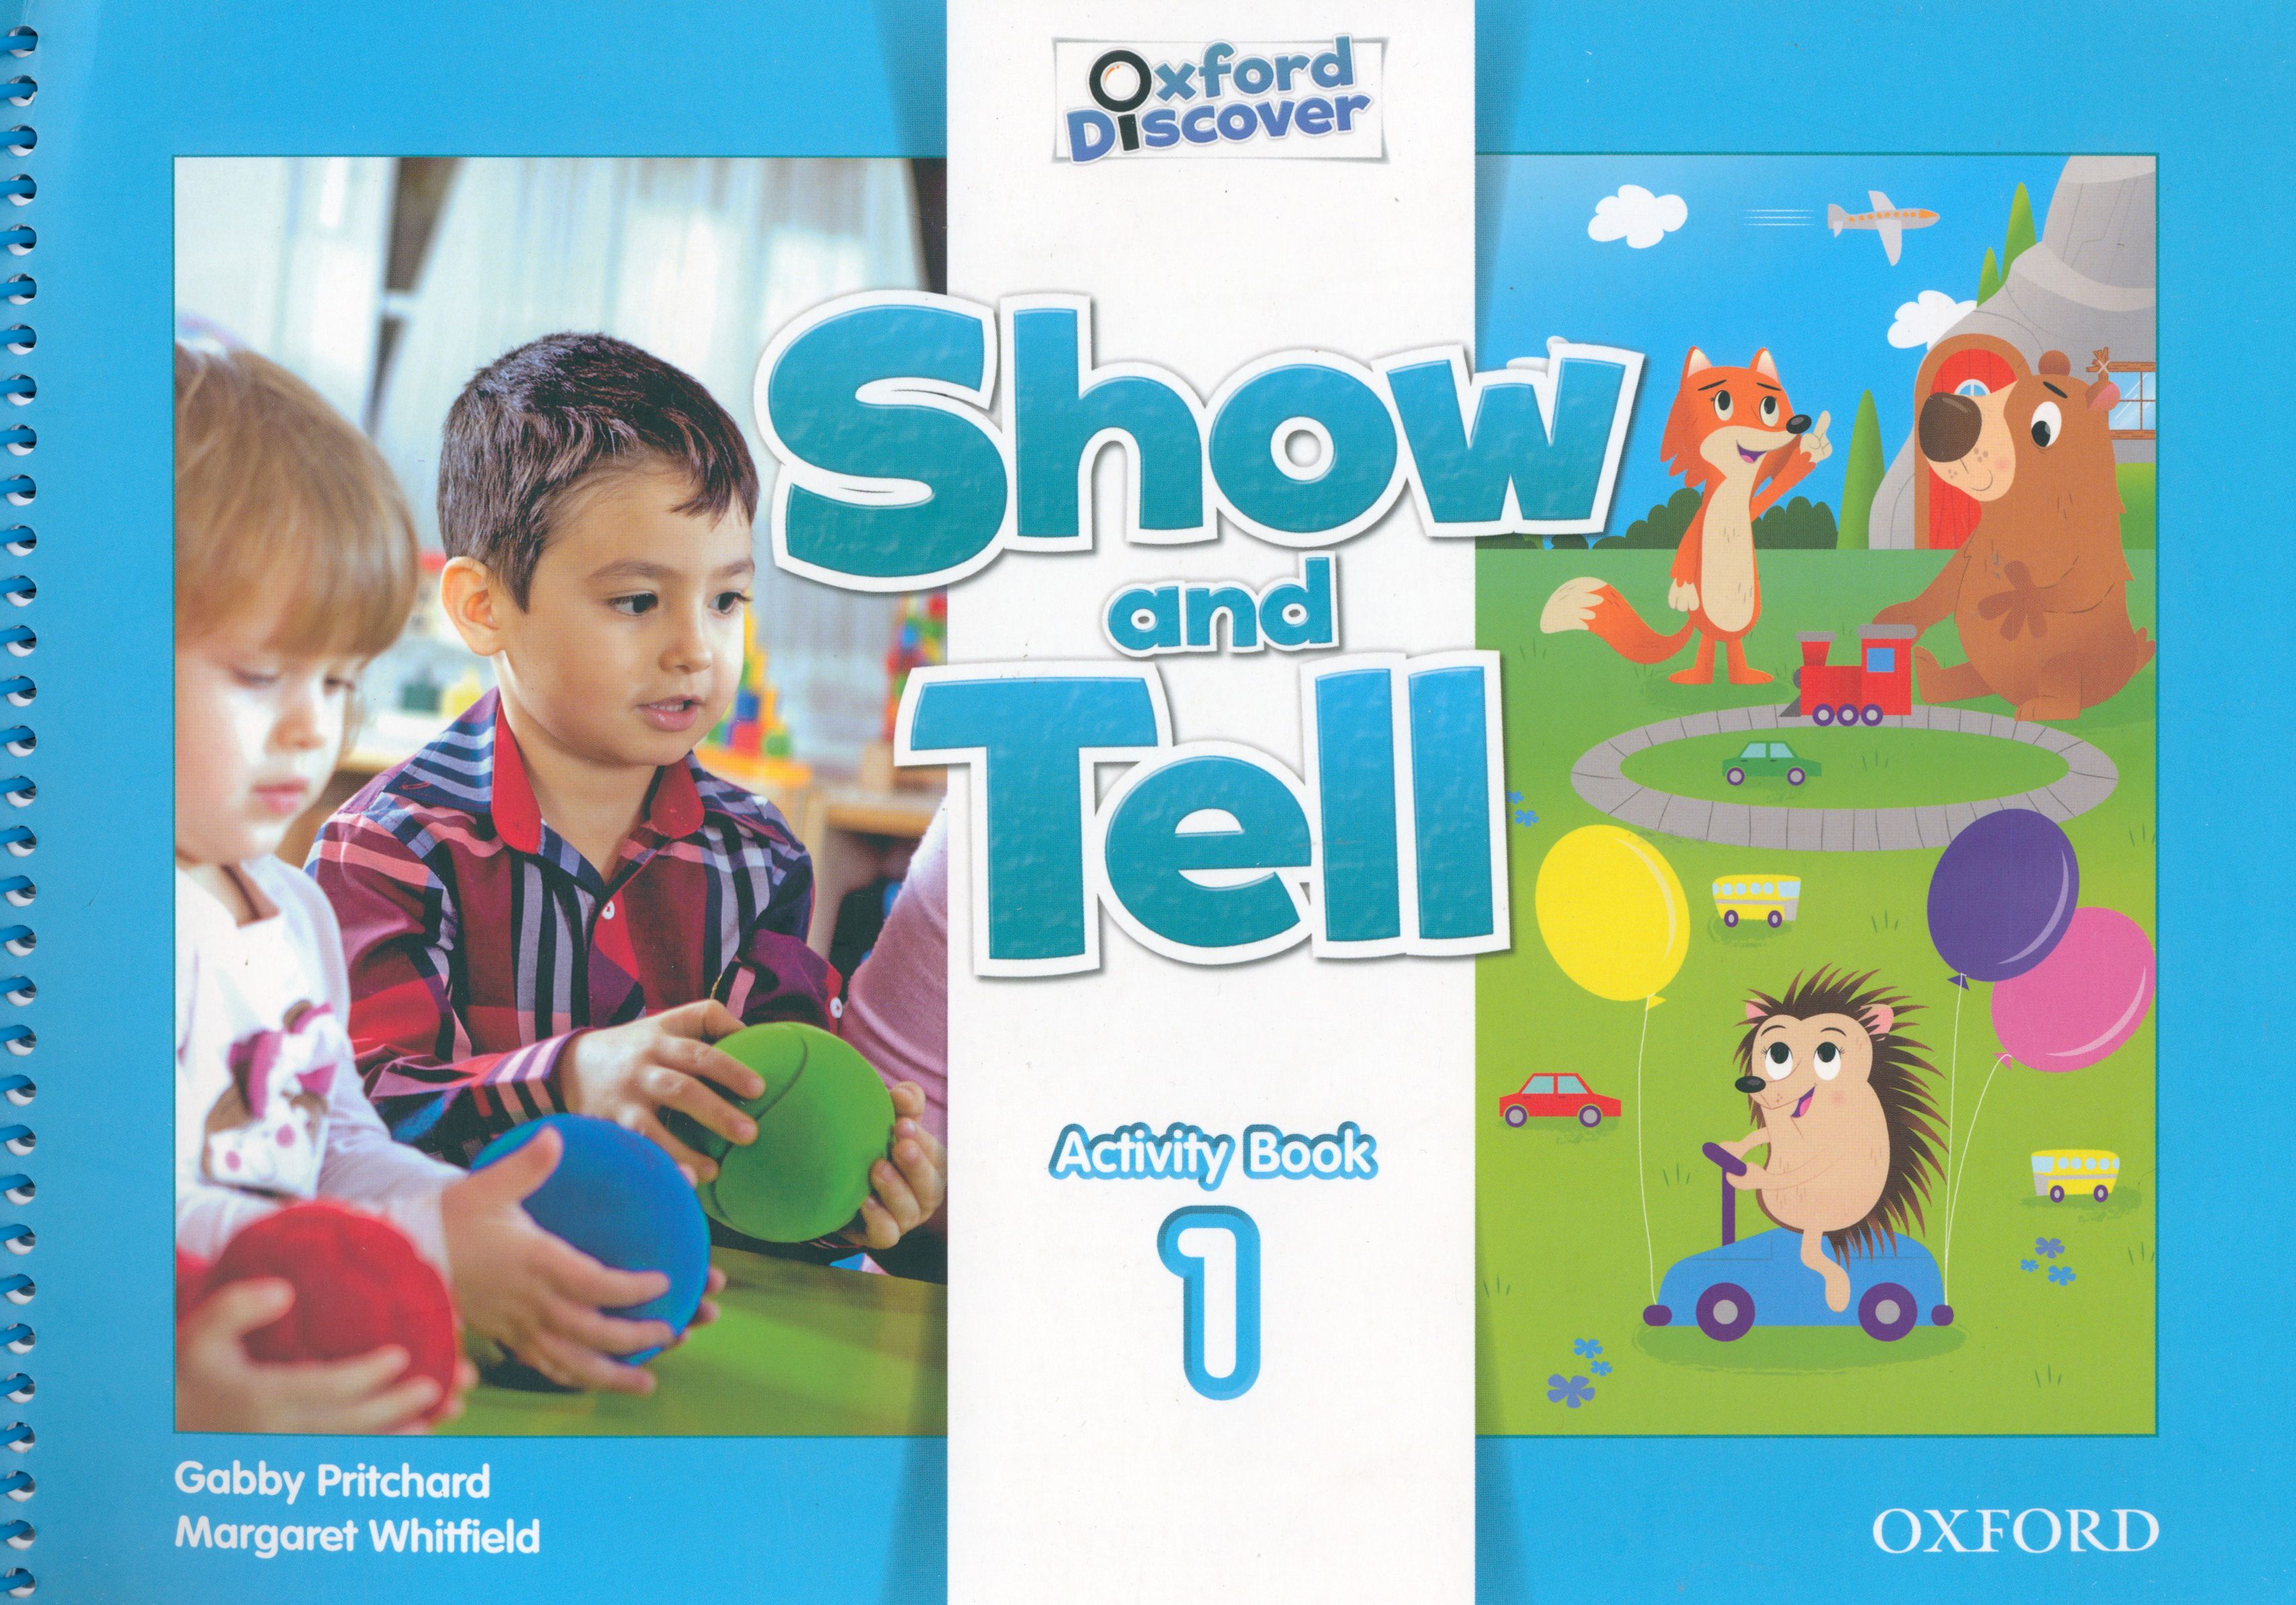 Discover english 1. Show and tell 1 Oxford. Show and tell 1 activity book. Show and tell книга. Show tell учебник.